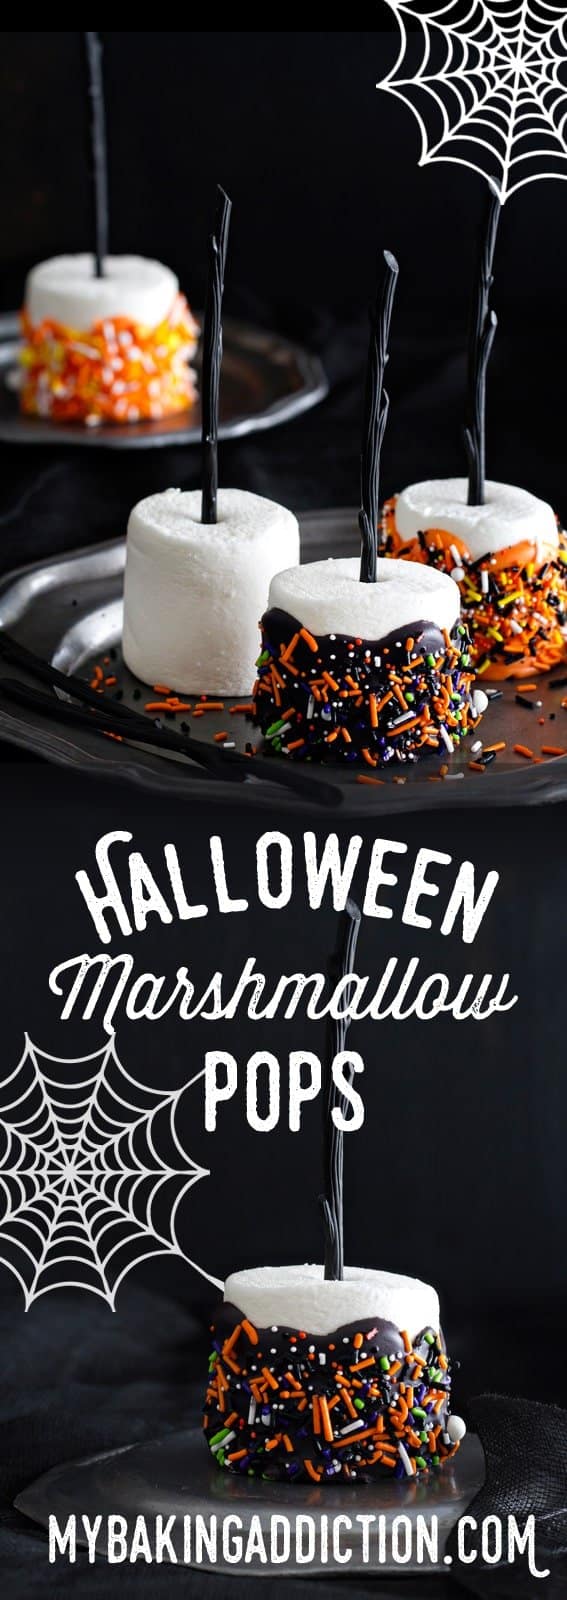 Halloween Marshmallow Pops are the handheld treat you want at your Halloween party. They're simple and adorable! 